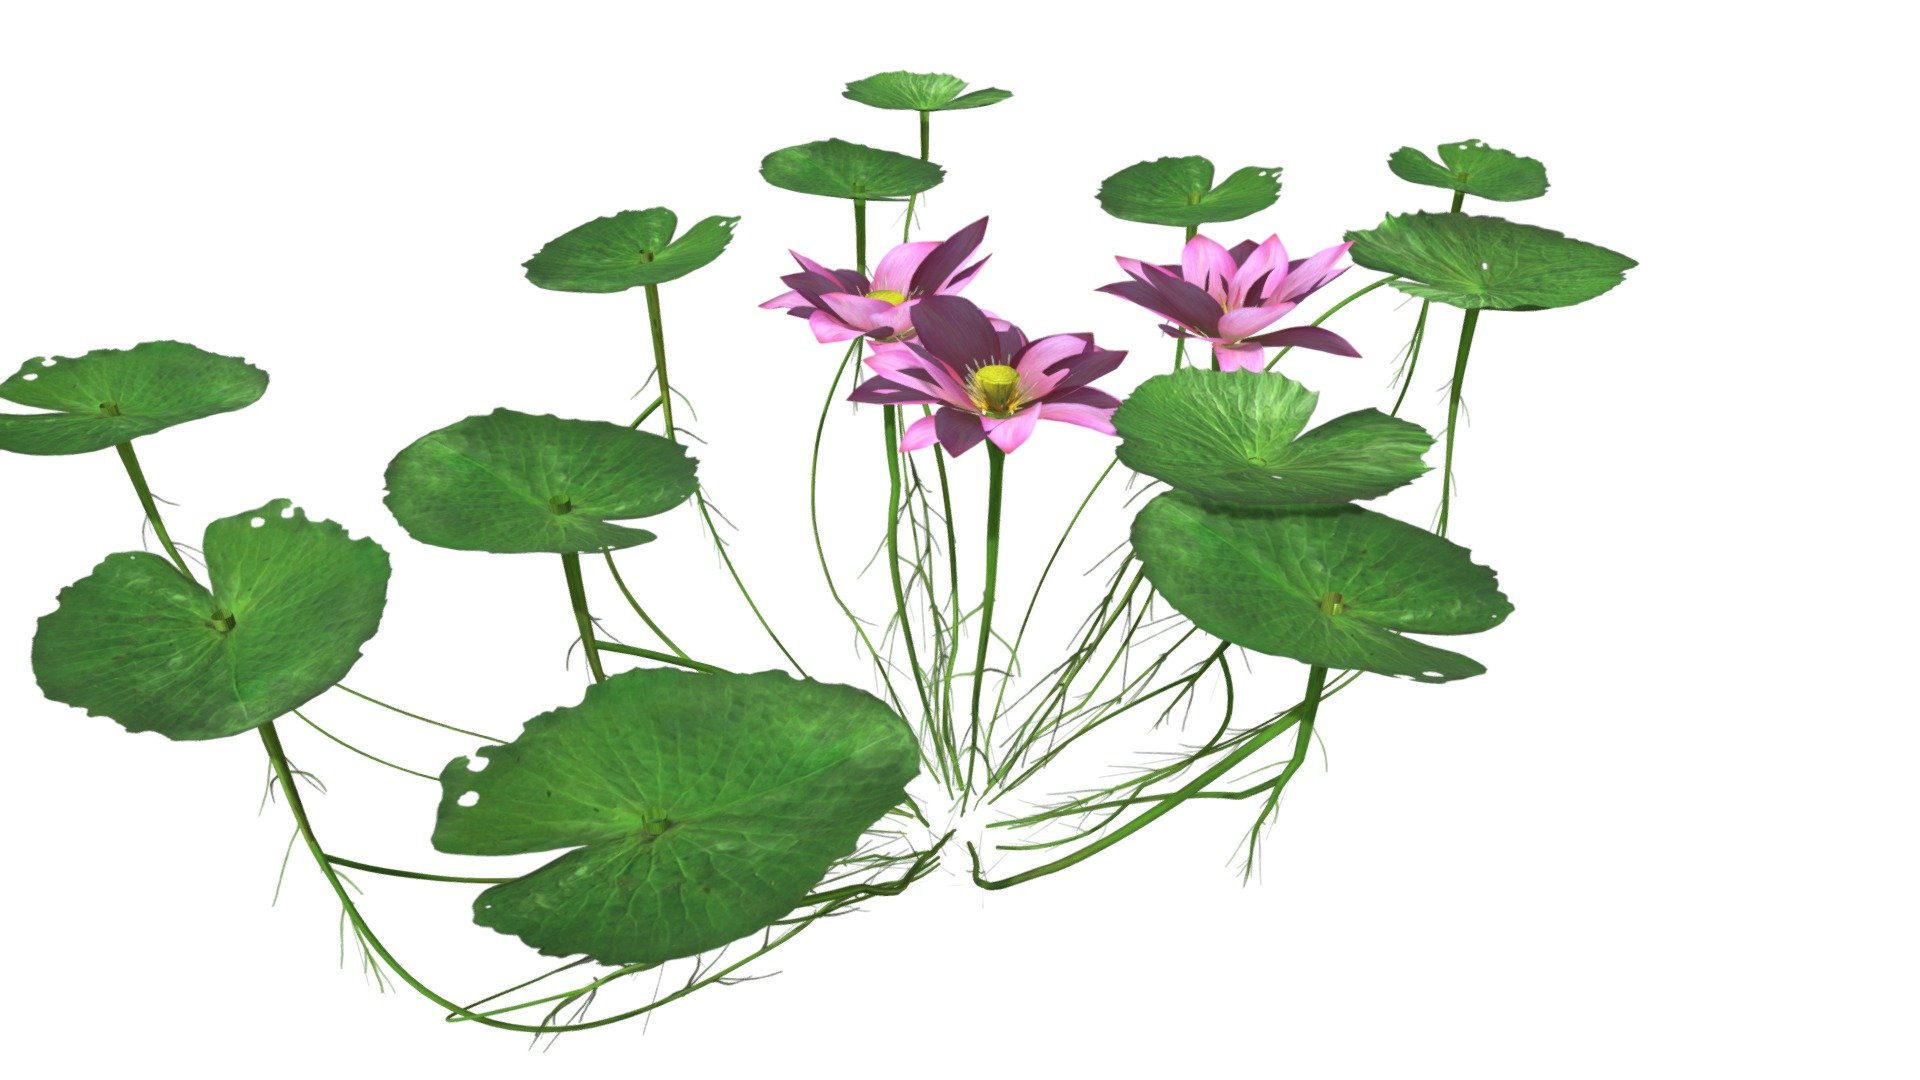 This 3D model of the Lotus Flower Plant is a highly detailed and photorealistic option suitable for architectural, landscaping, and video game projects. The model is designed with carefully crafted textures that mimic the natural beauty of a real Lotus Flower Plant. Its versatility allows it to bring a touch of realism to any project, whether it's a small architectural rendering or a large-scale landscape design. Additionally, the model is optimized for performance and features efficient UV mapping. This photorealistic 3D model is the perfect solution for architects, landscapers, and game developers who want to enhance the visual experience of their project with a highly detailed, photorealistic Lotus Flower Plant 3d model